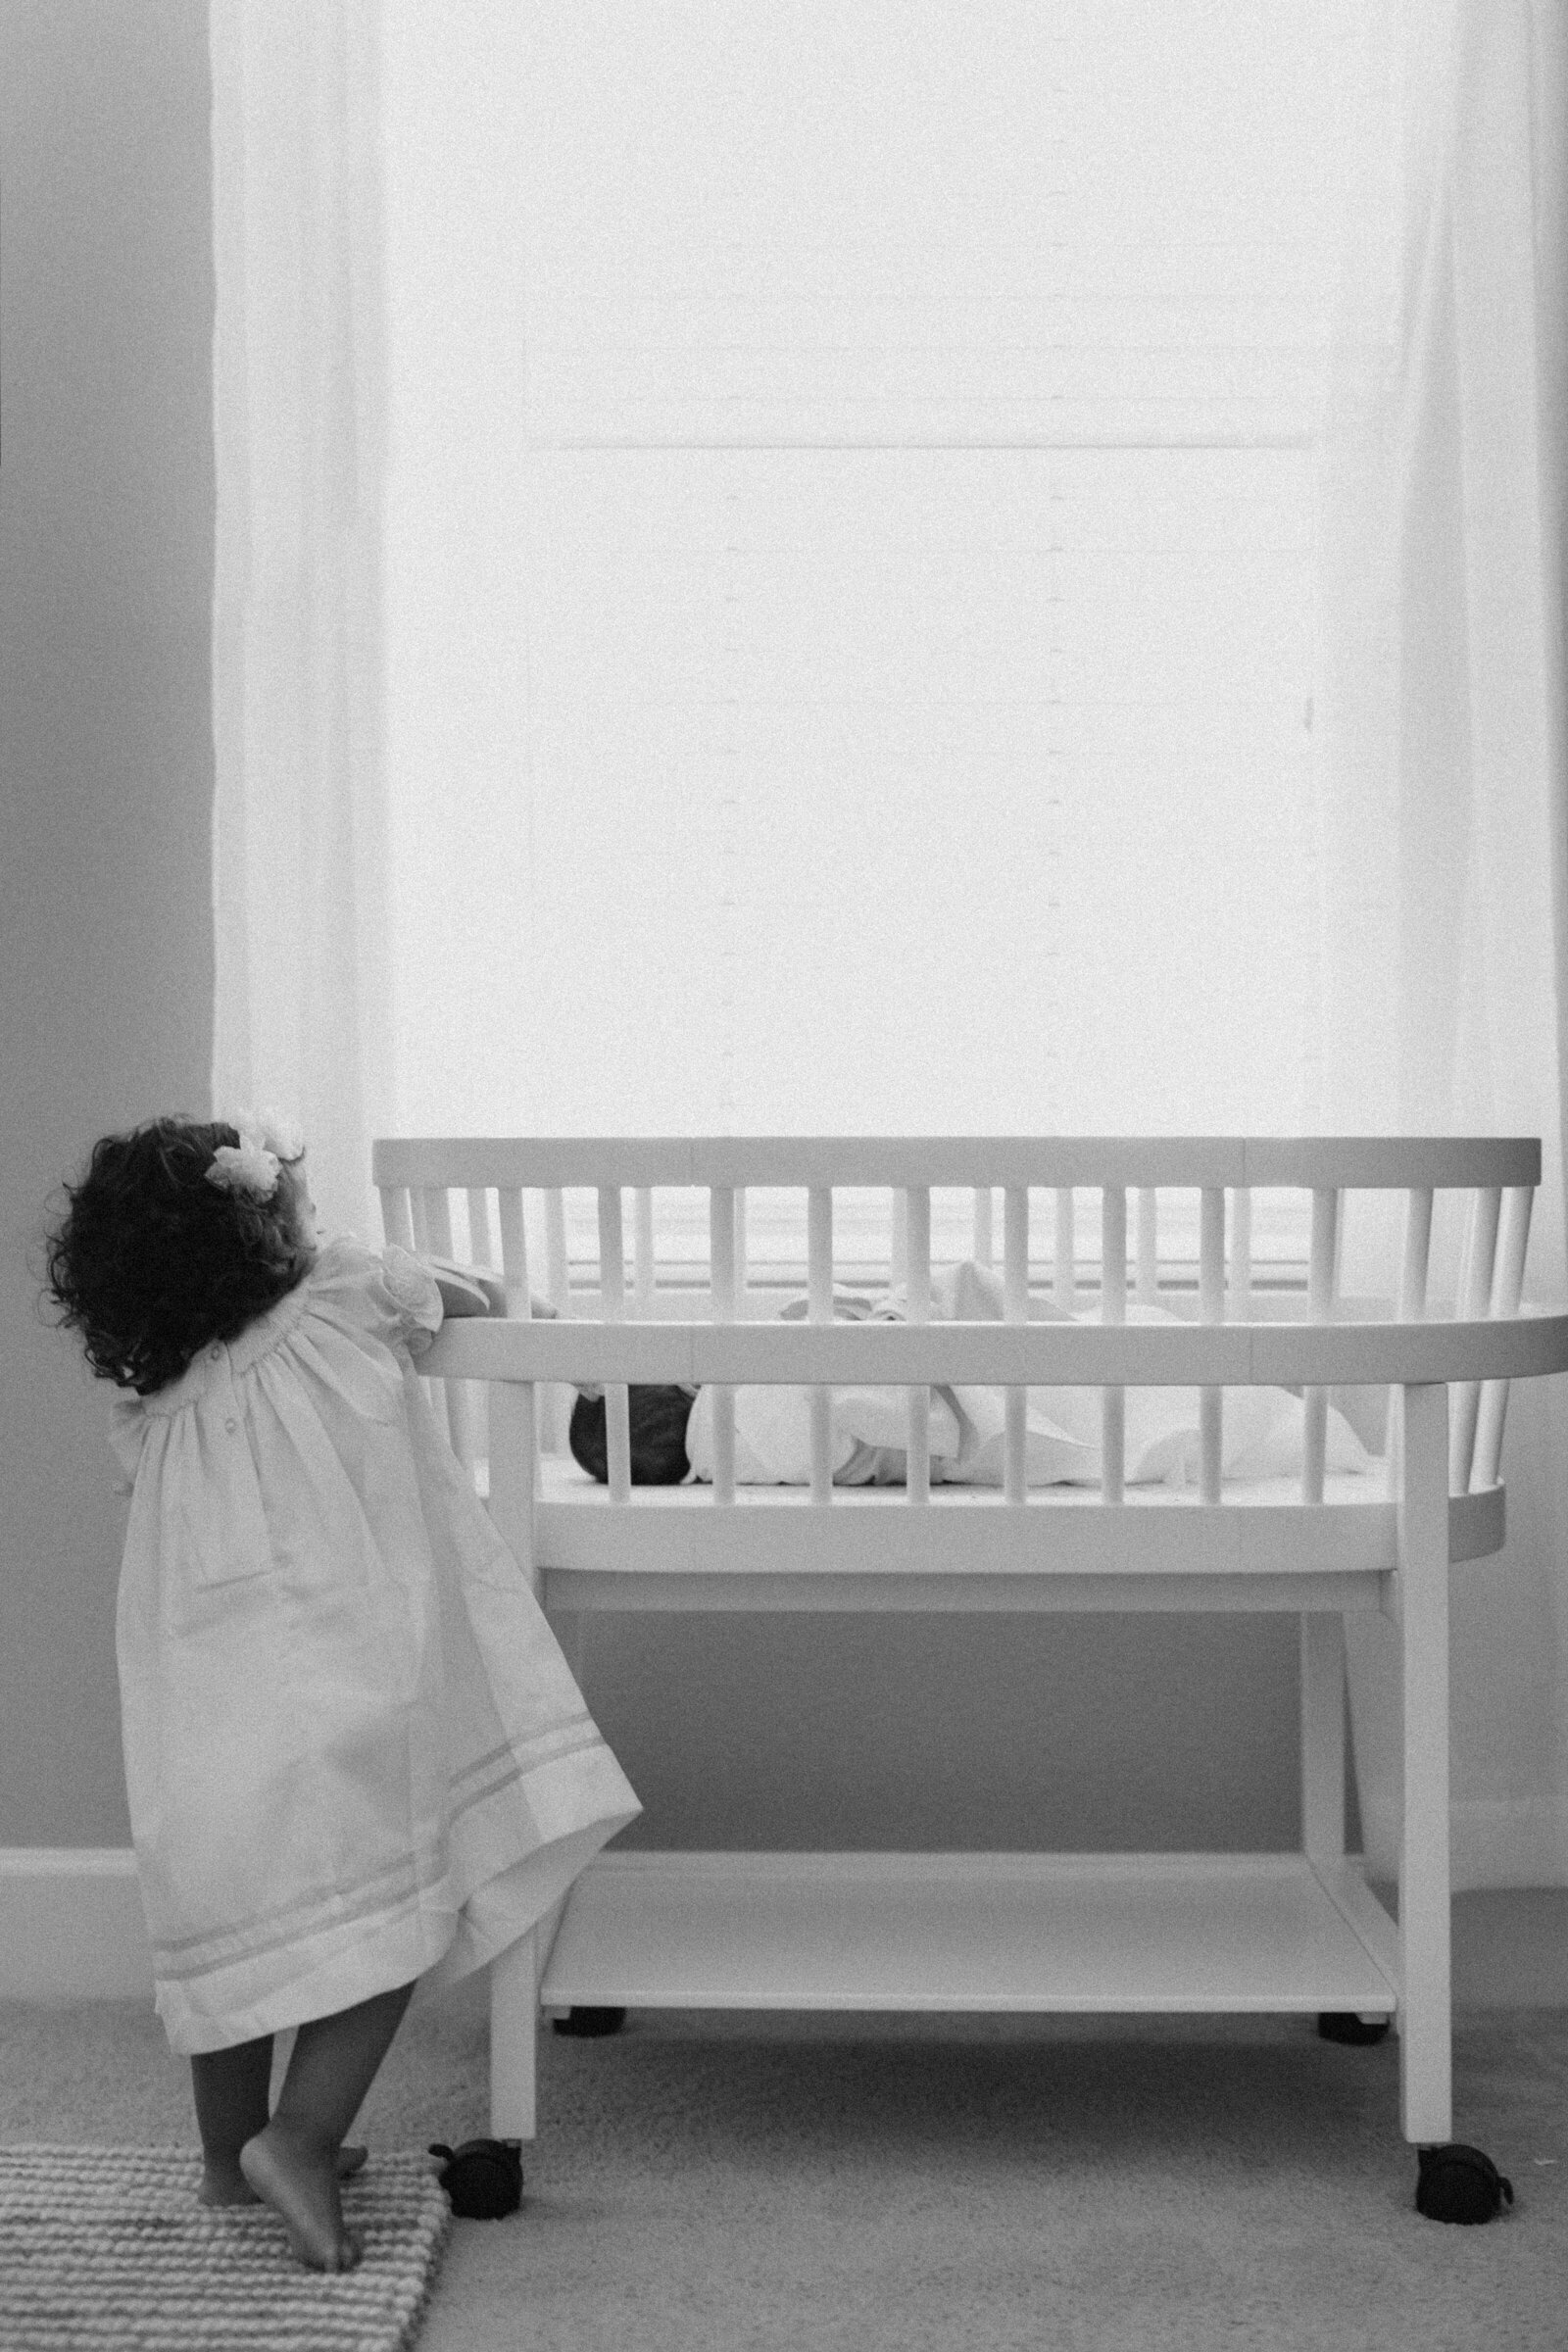 A new big sister stands on tip toes trying to reach into her baby brother's crib